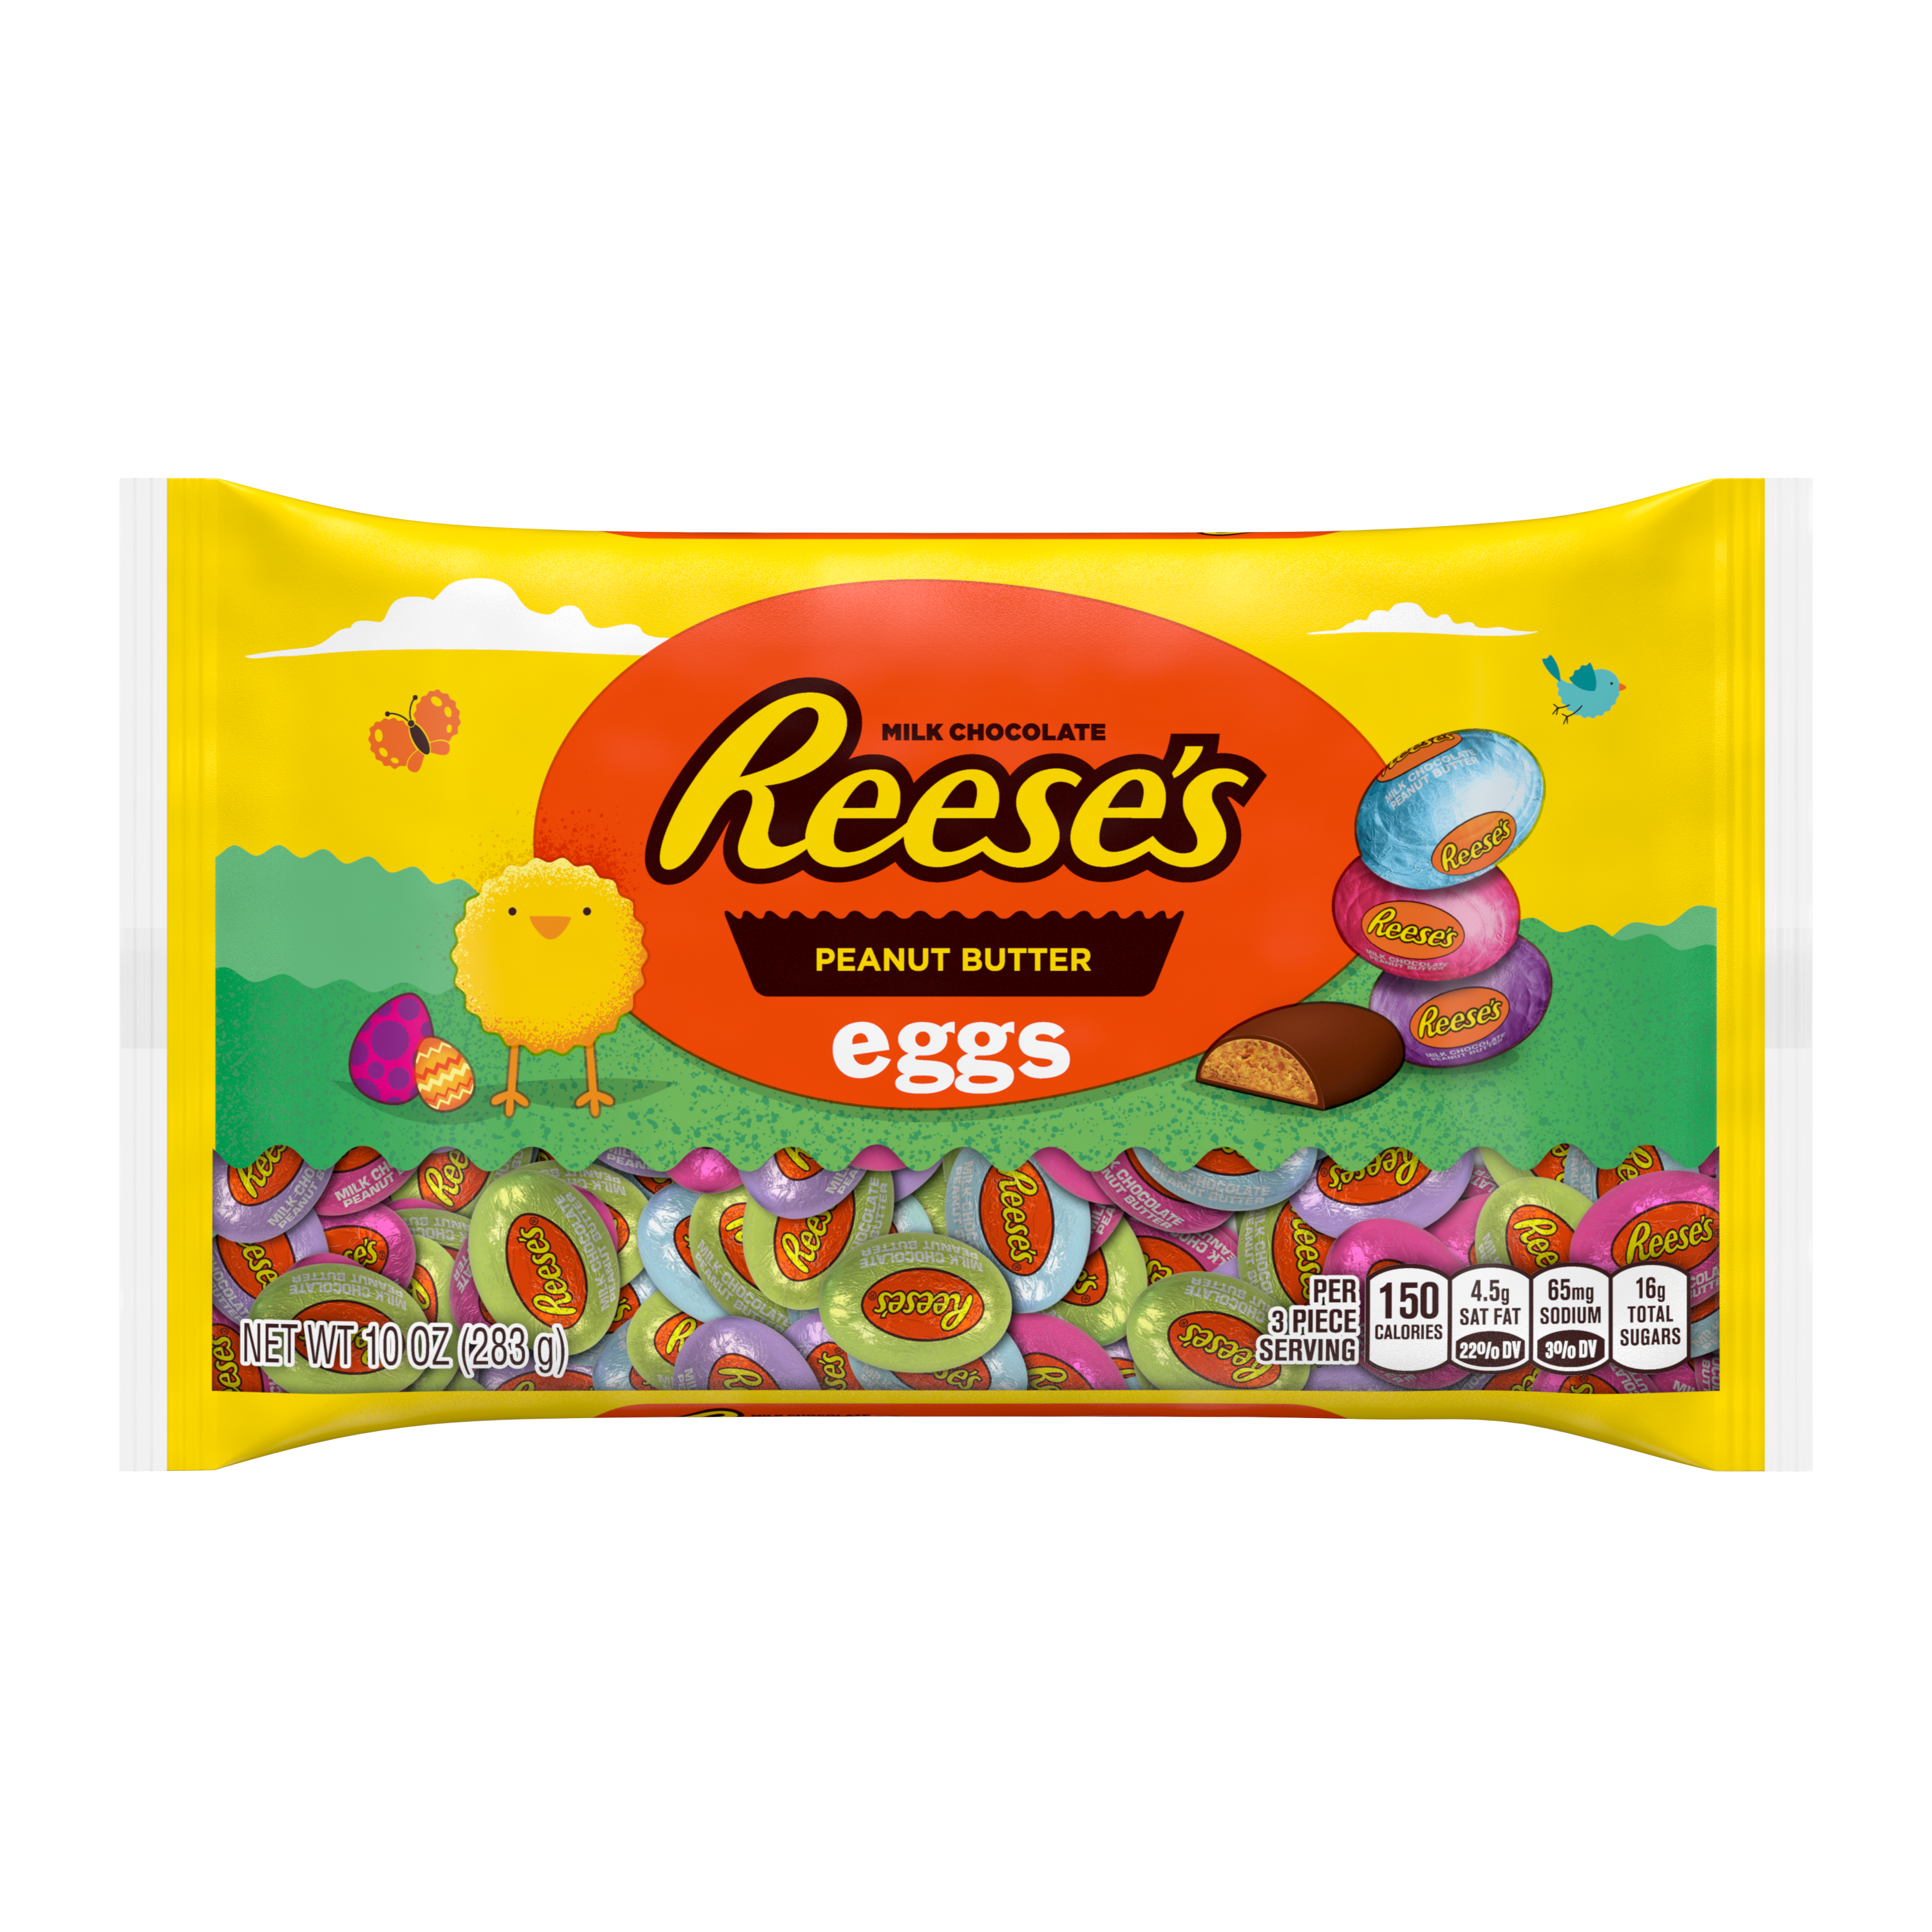 REESE'S Easter Milk Chocolate Peanut Butter Eggs, 10 oz bag - Front of Package